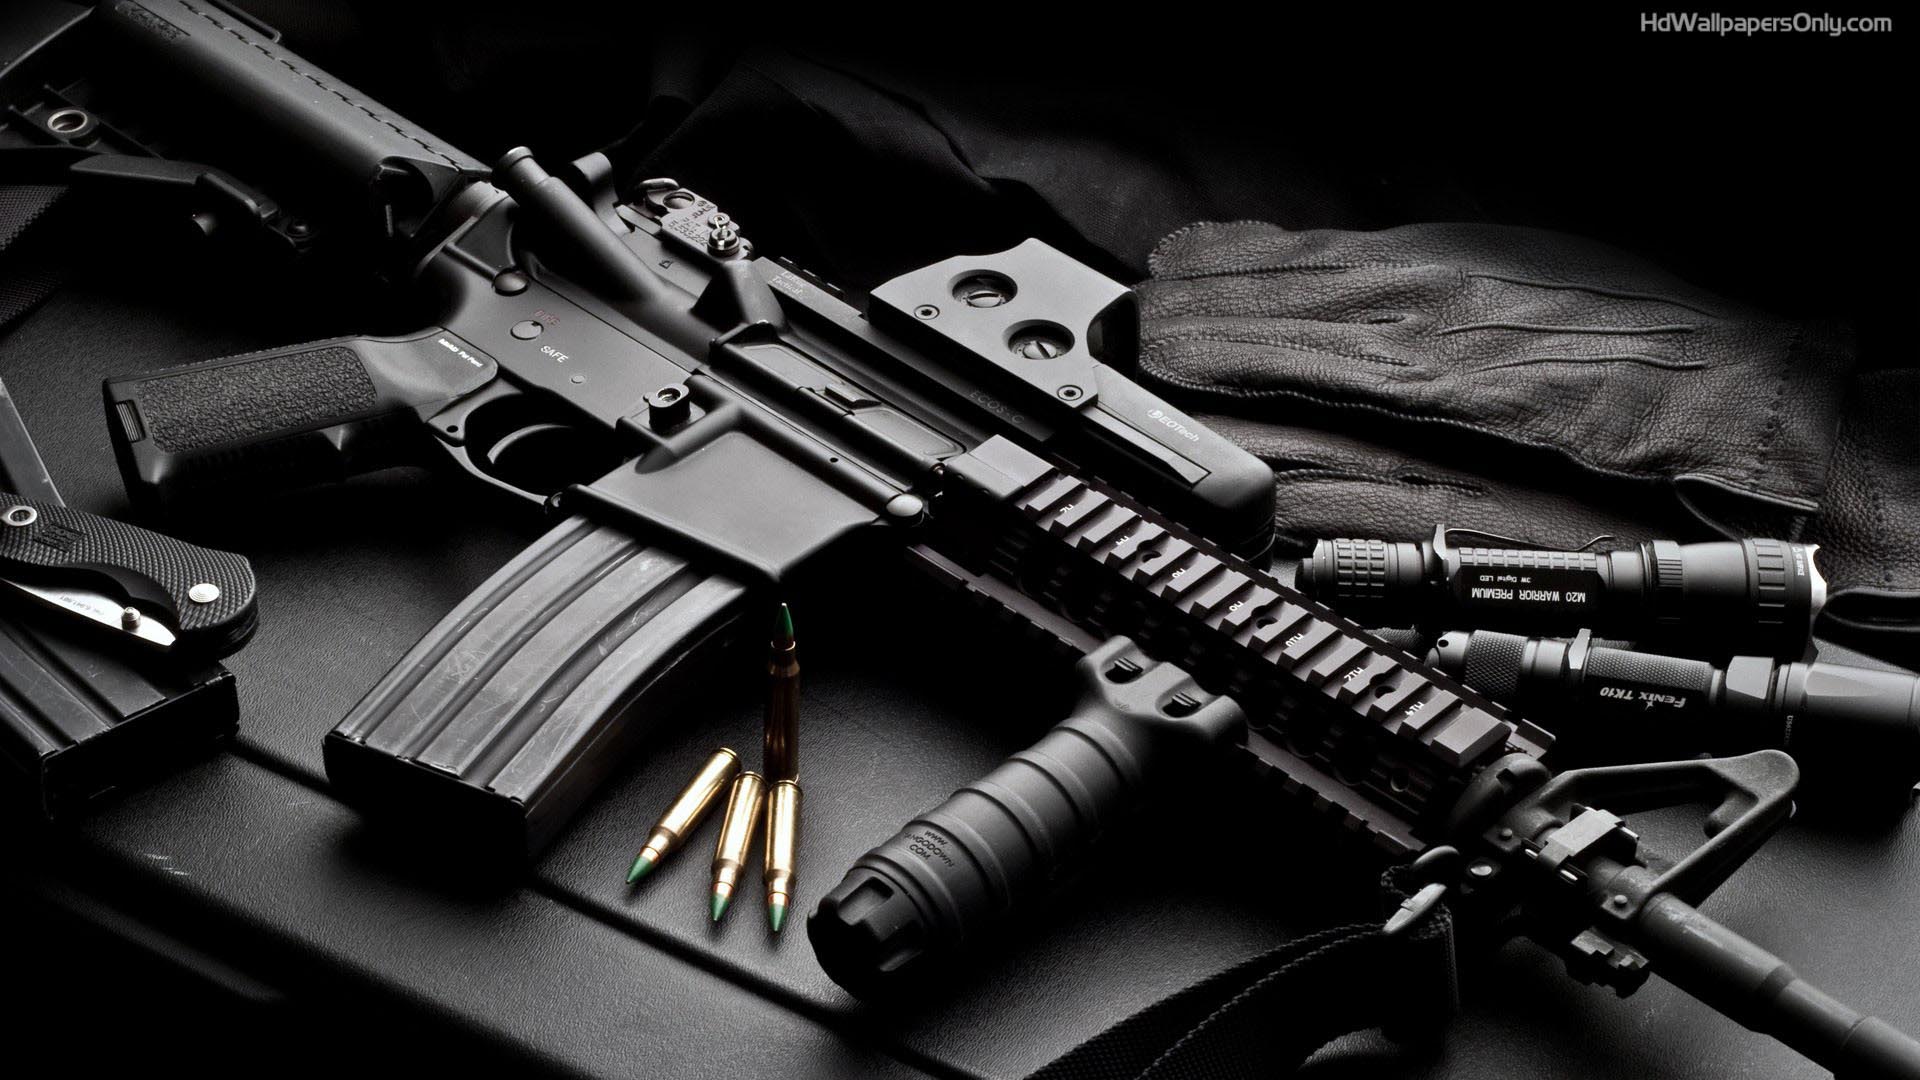 Download Weapons wallpapers for mobile phone free Weapons HD pictures